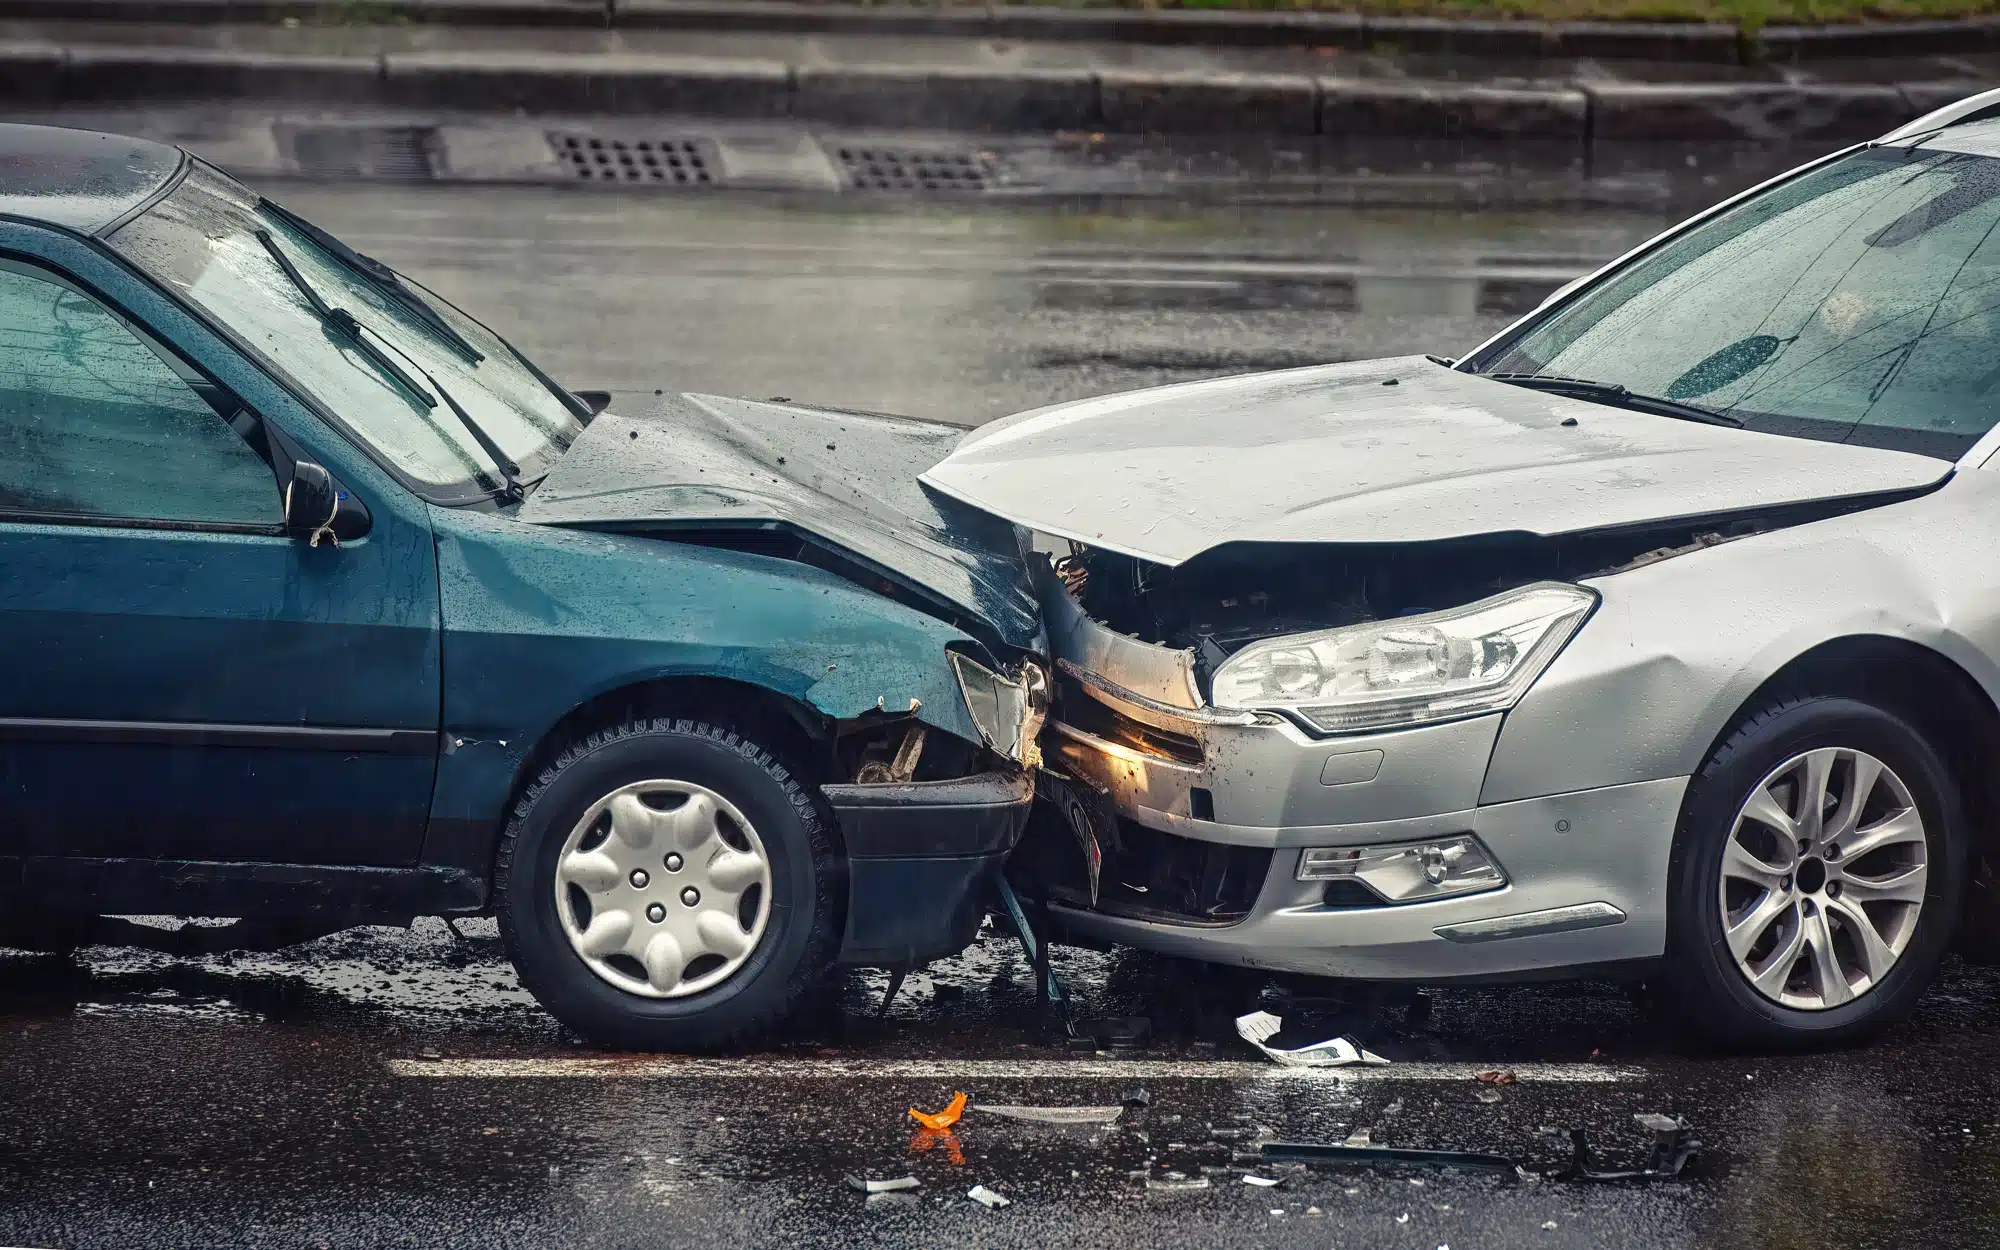 Two cars involved in a head-on collision on a rainy street.